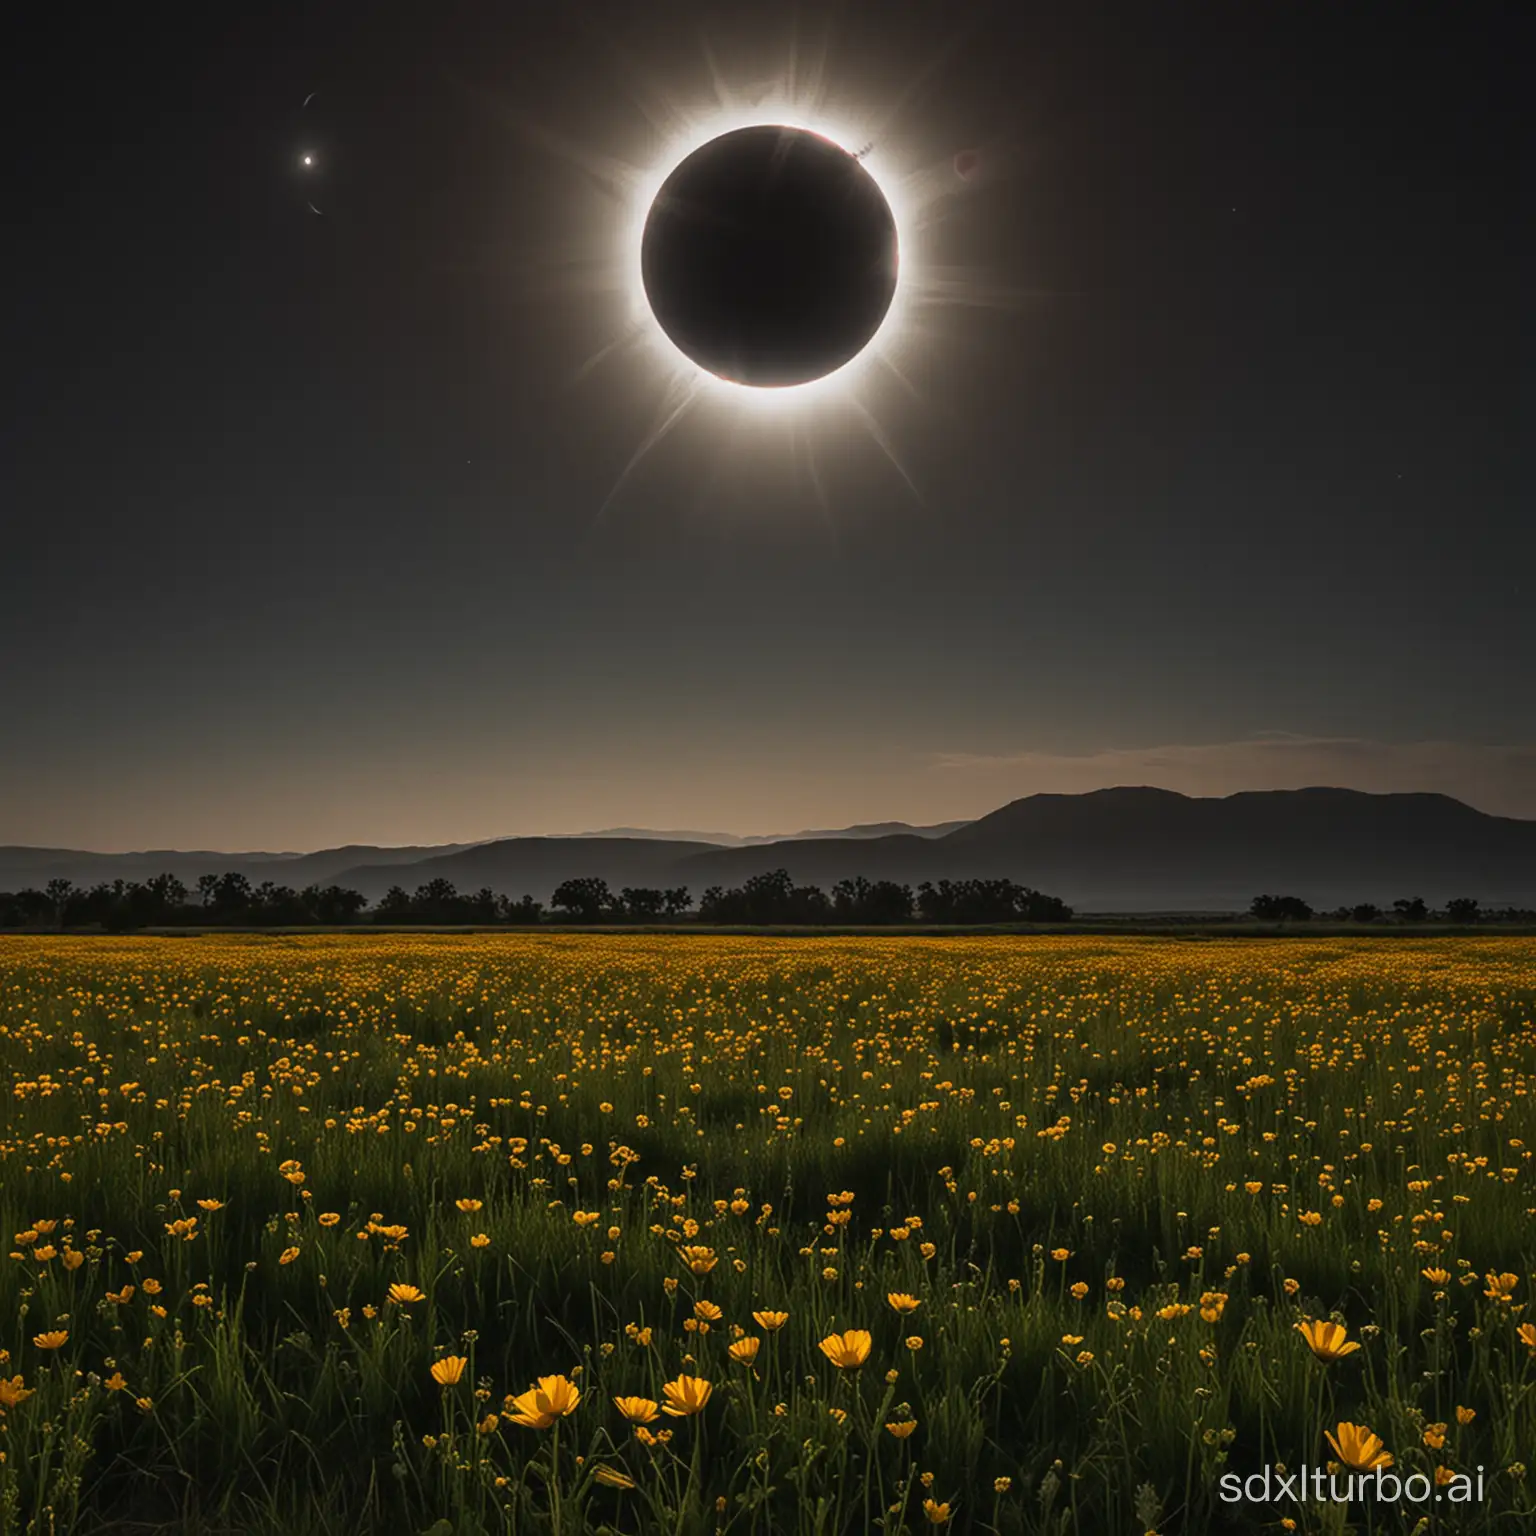 A total solar eclipse ((very large)) hangs high above the grassland filled with flowers, with the eclipse occupying about 1/4 of the scene. The grassland is bright, and the sky is dark.